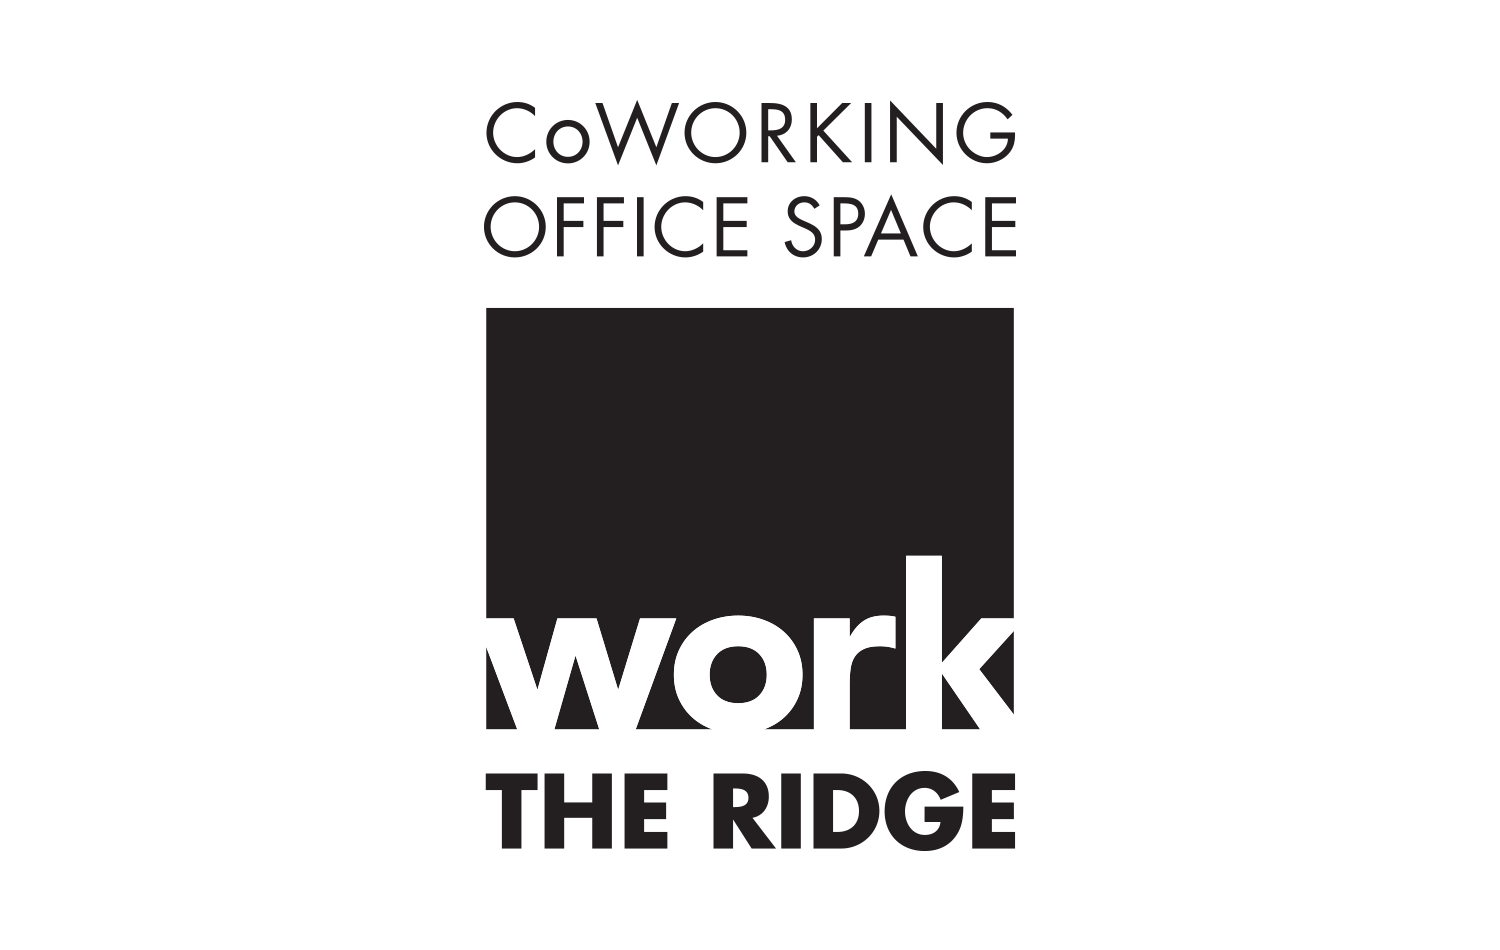 The logo design for Work the Ridge, a co-working office space, shows the word WORK simply appearing within a black square